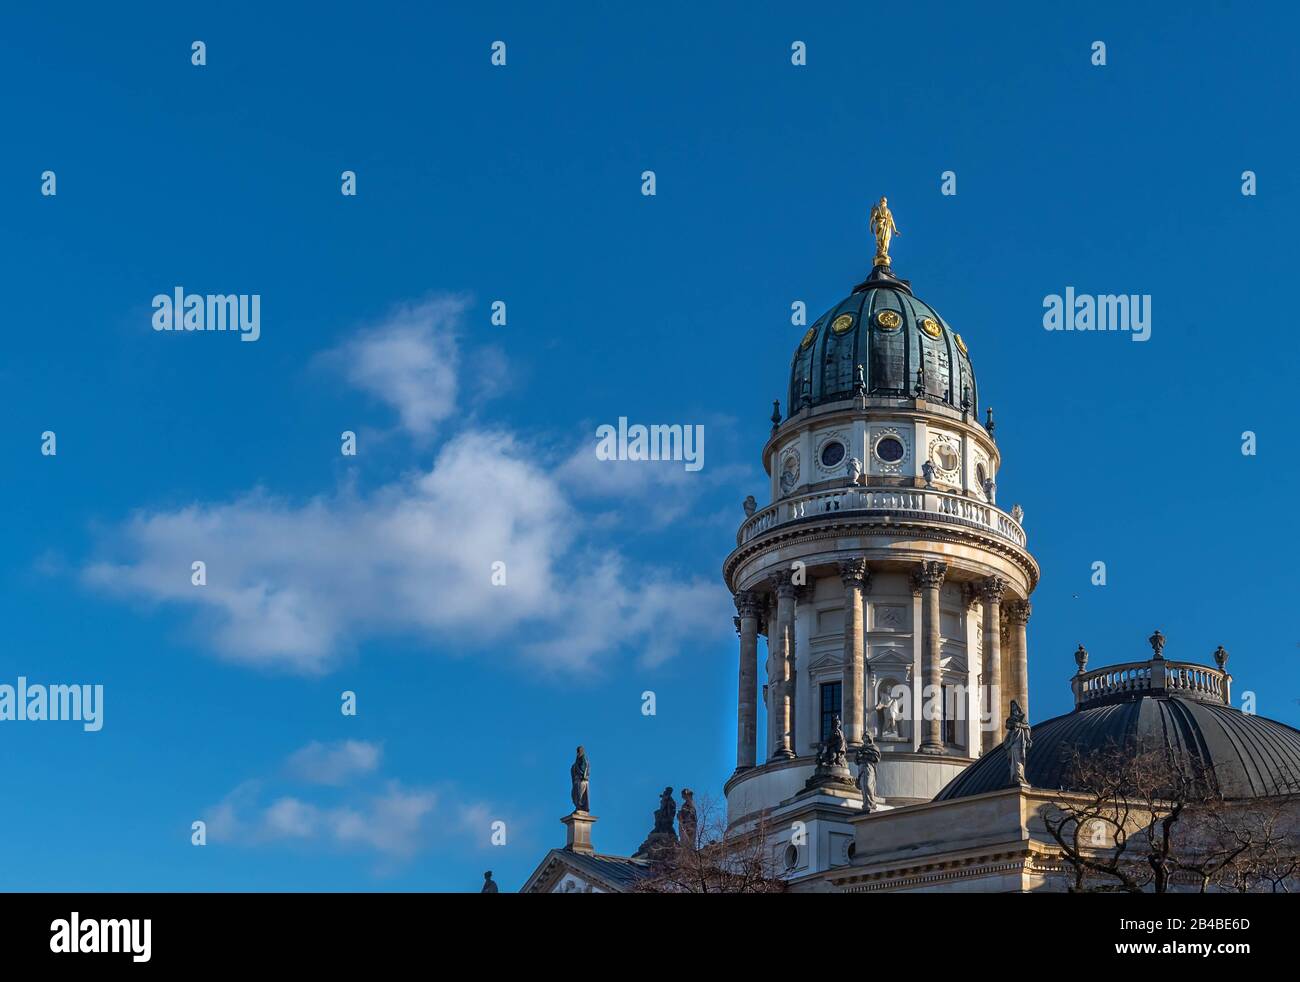 Cityscapes and motifs, from Kiel, Rendburg, Kappeln and Berlin Stock Photo